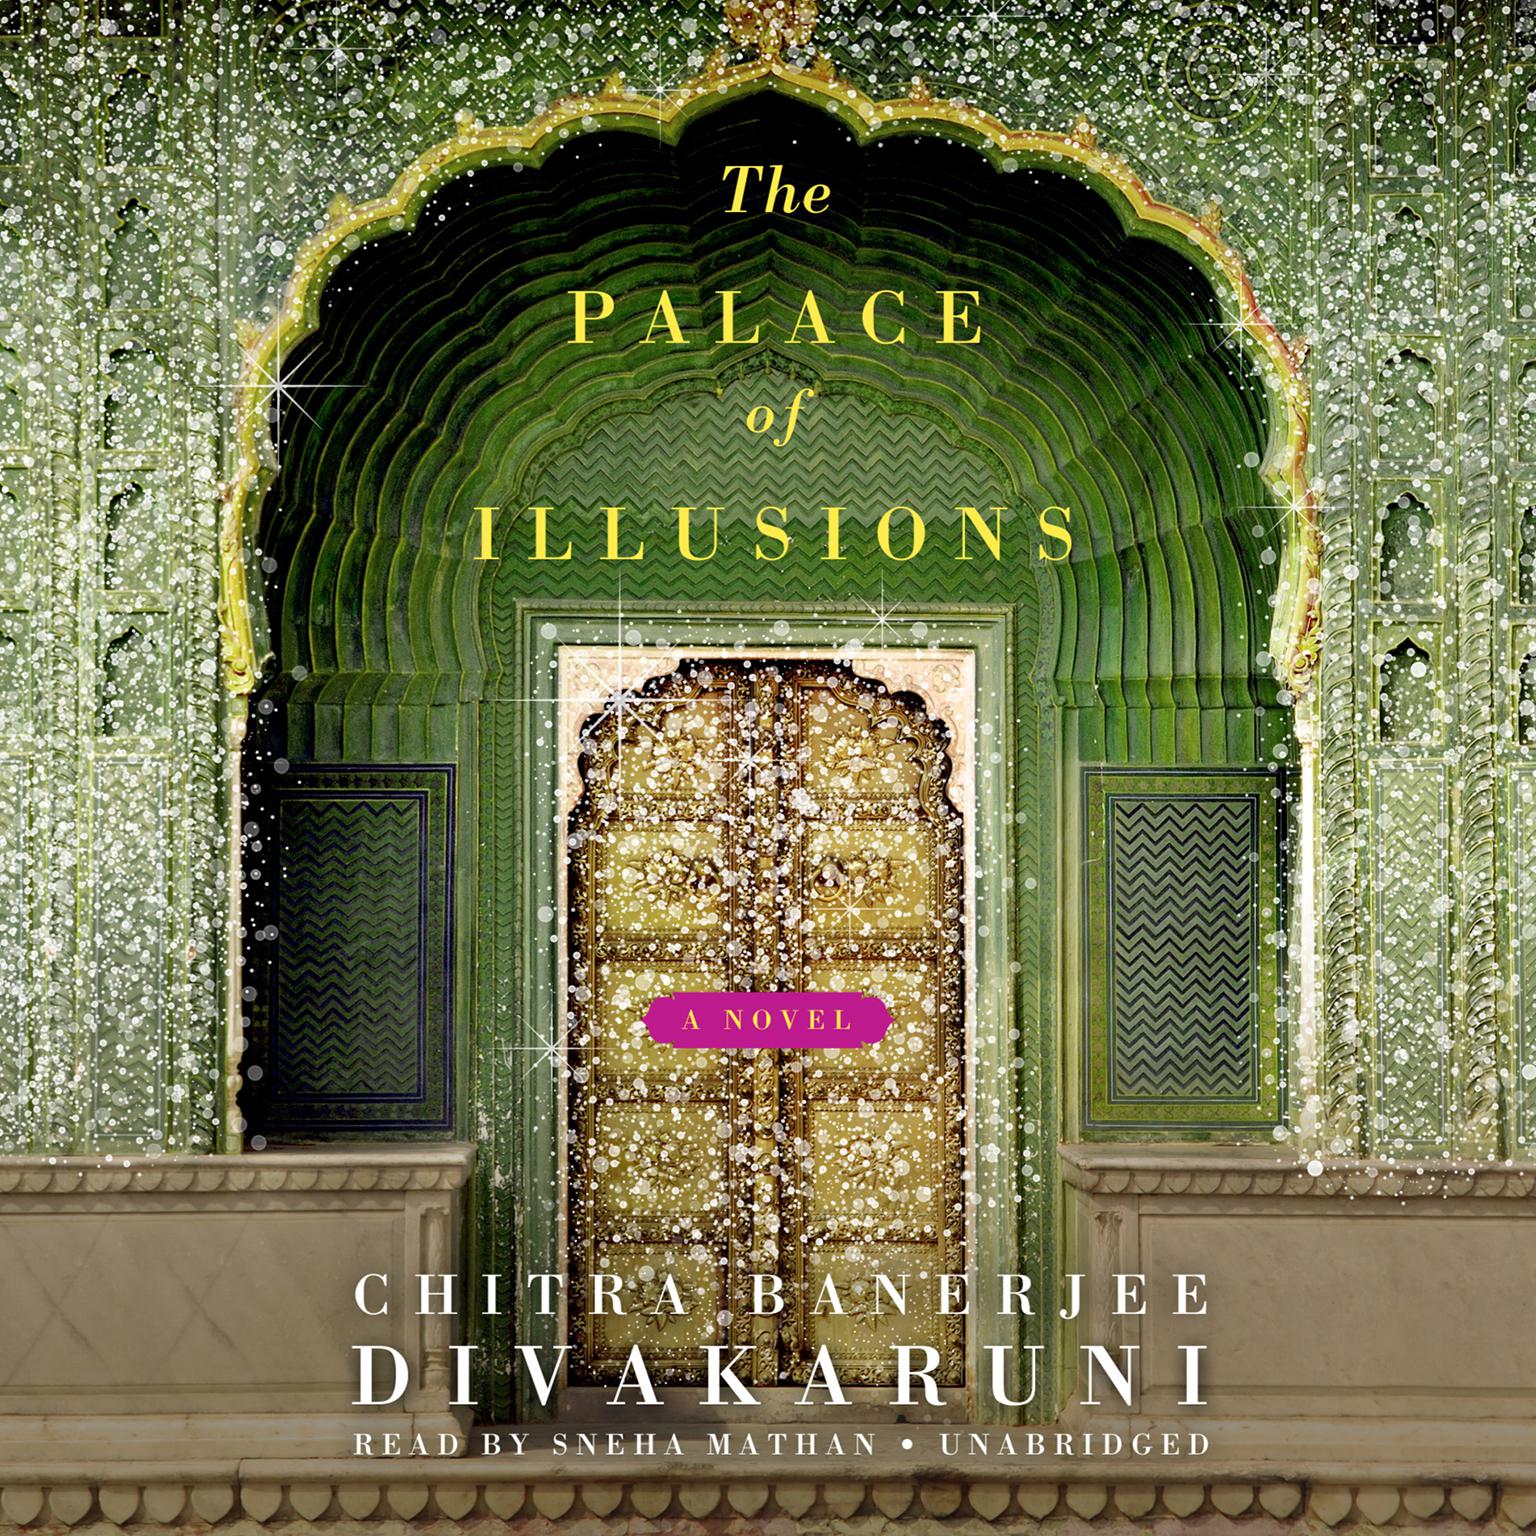 The Palace of Illusions: A Novel Audiobook, by Chitra Banerjee Divakaruni